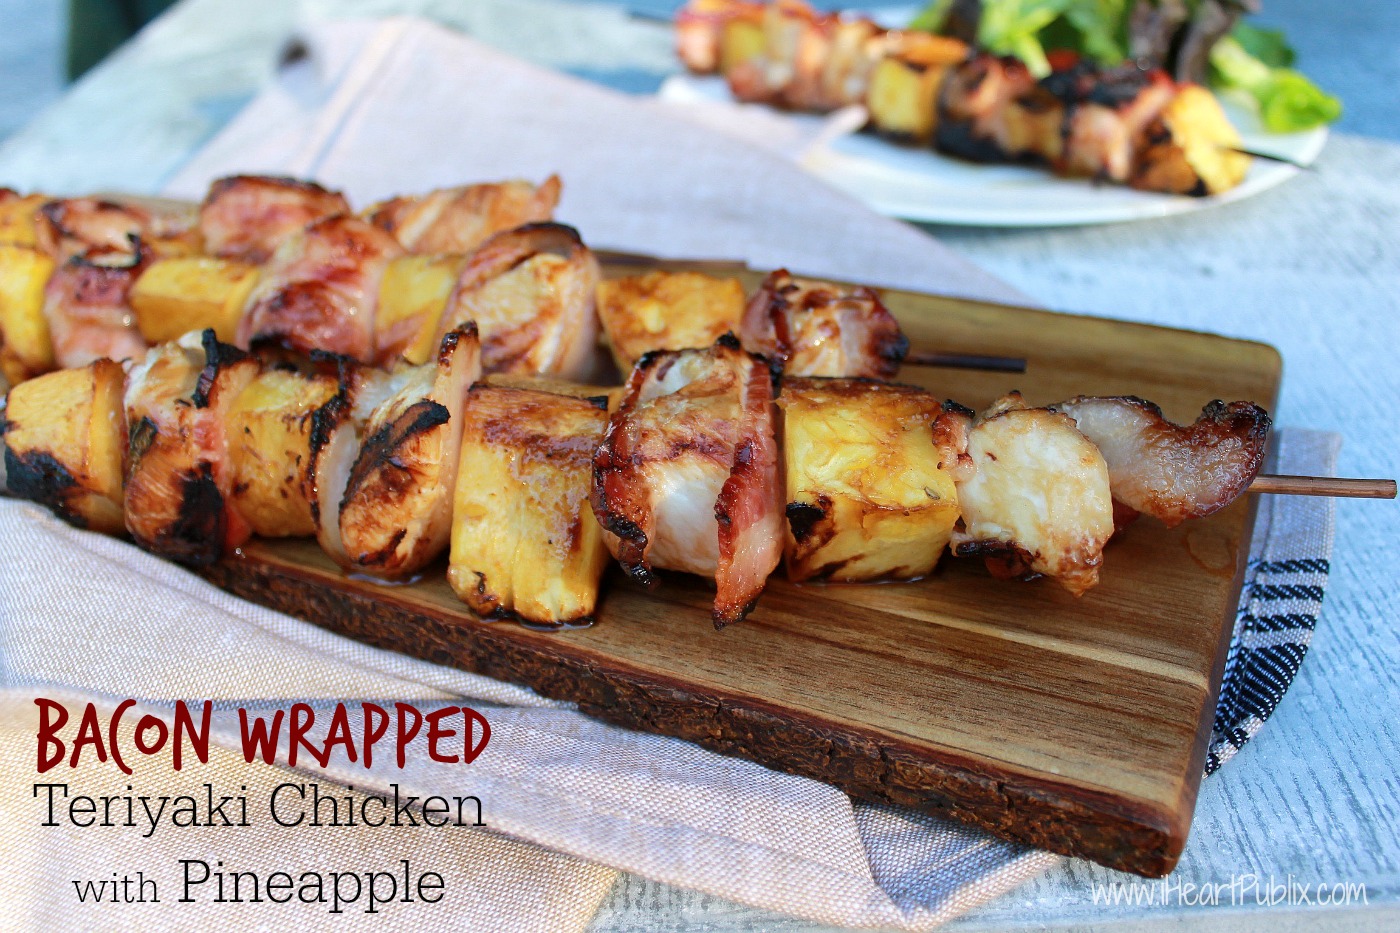 Bacon Wrapped Teriyaki Chicken with Pineapple – Made With The Great Taste Of Wright Brand Bacon